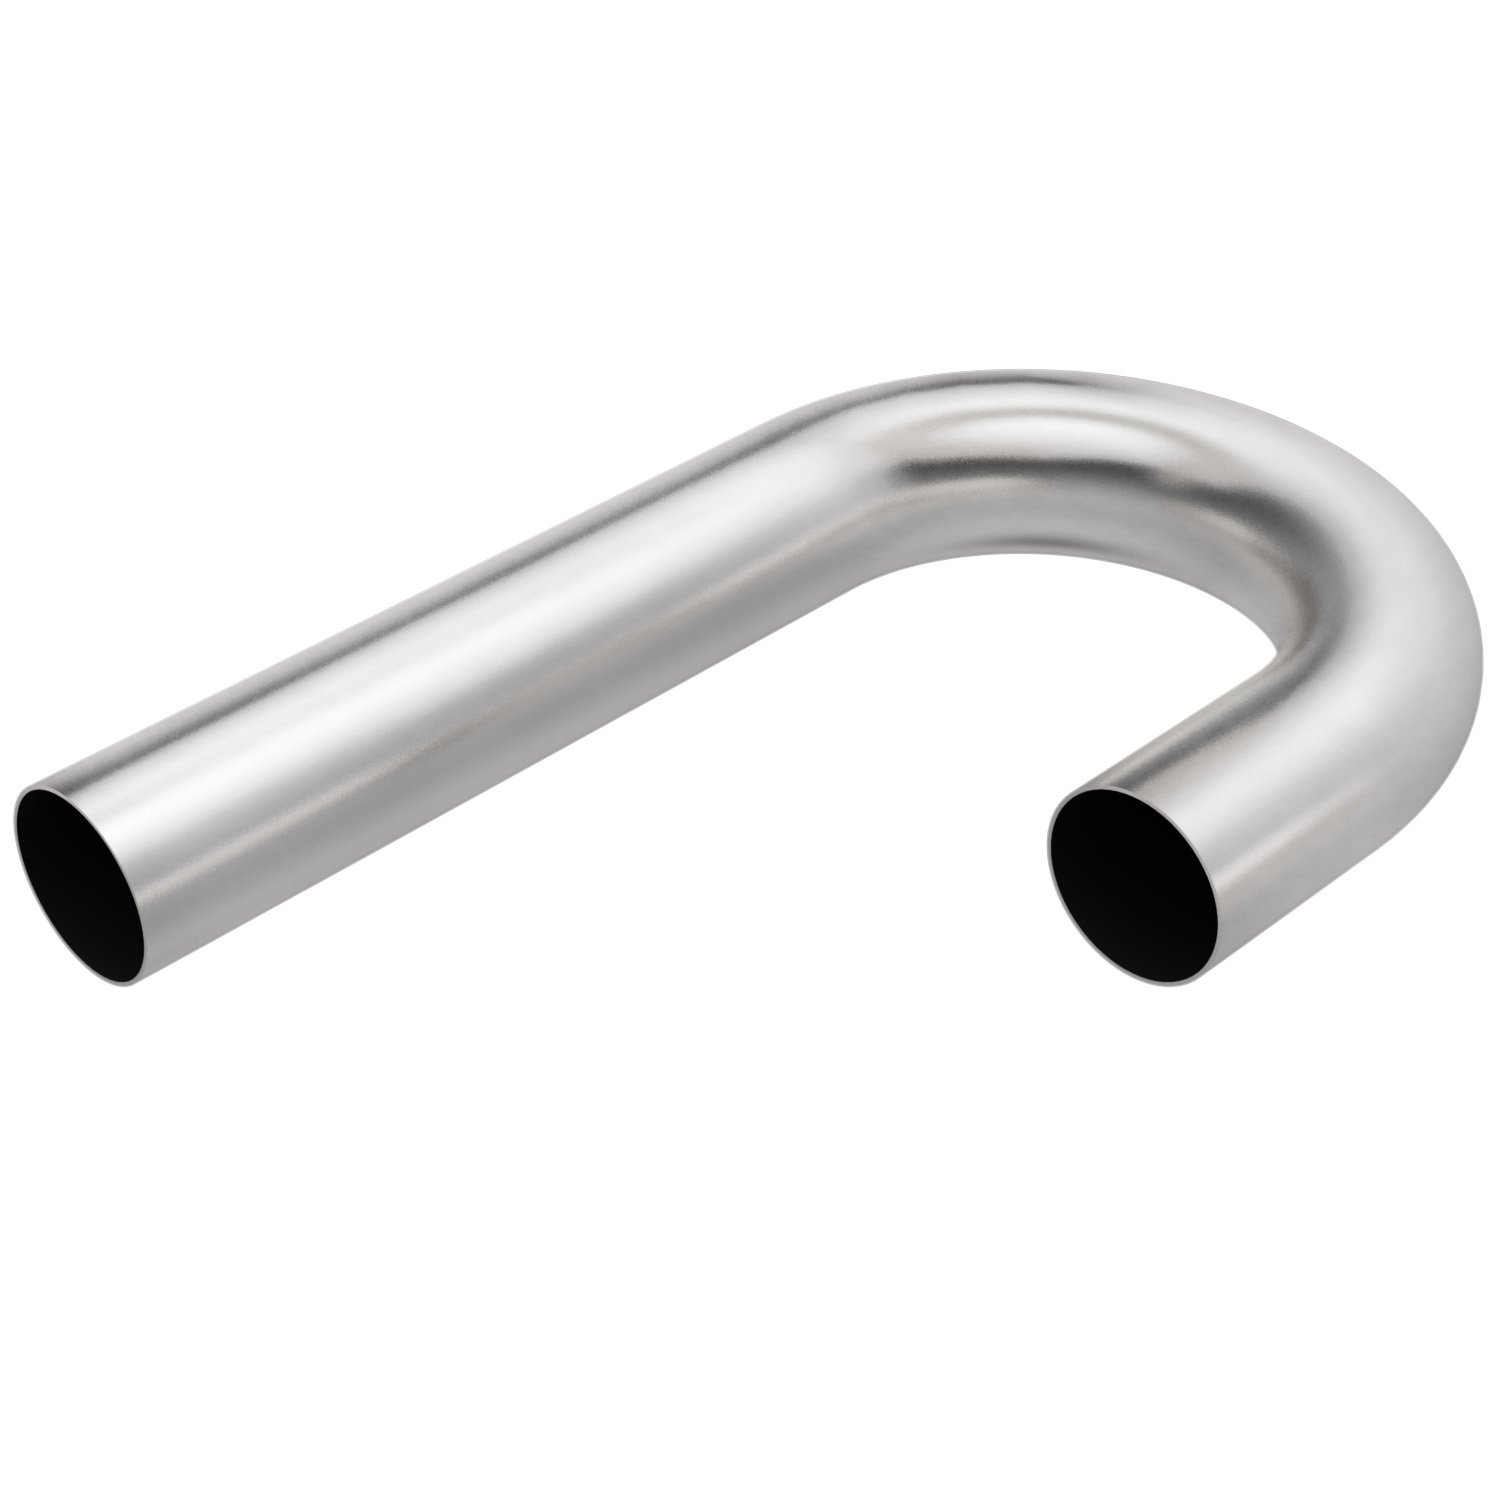 Stainless Steel 180° Transition Exhaust Pipes Outside Diameter: 3"